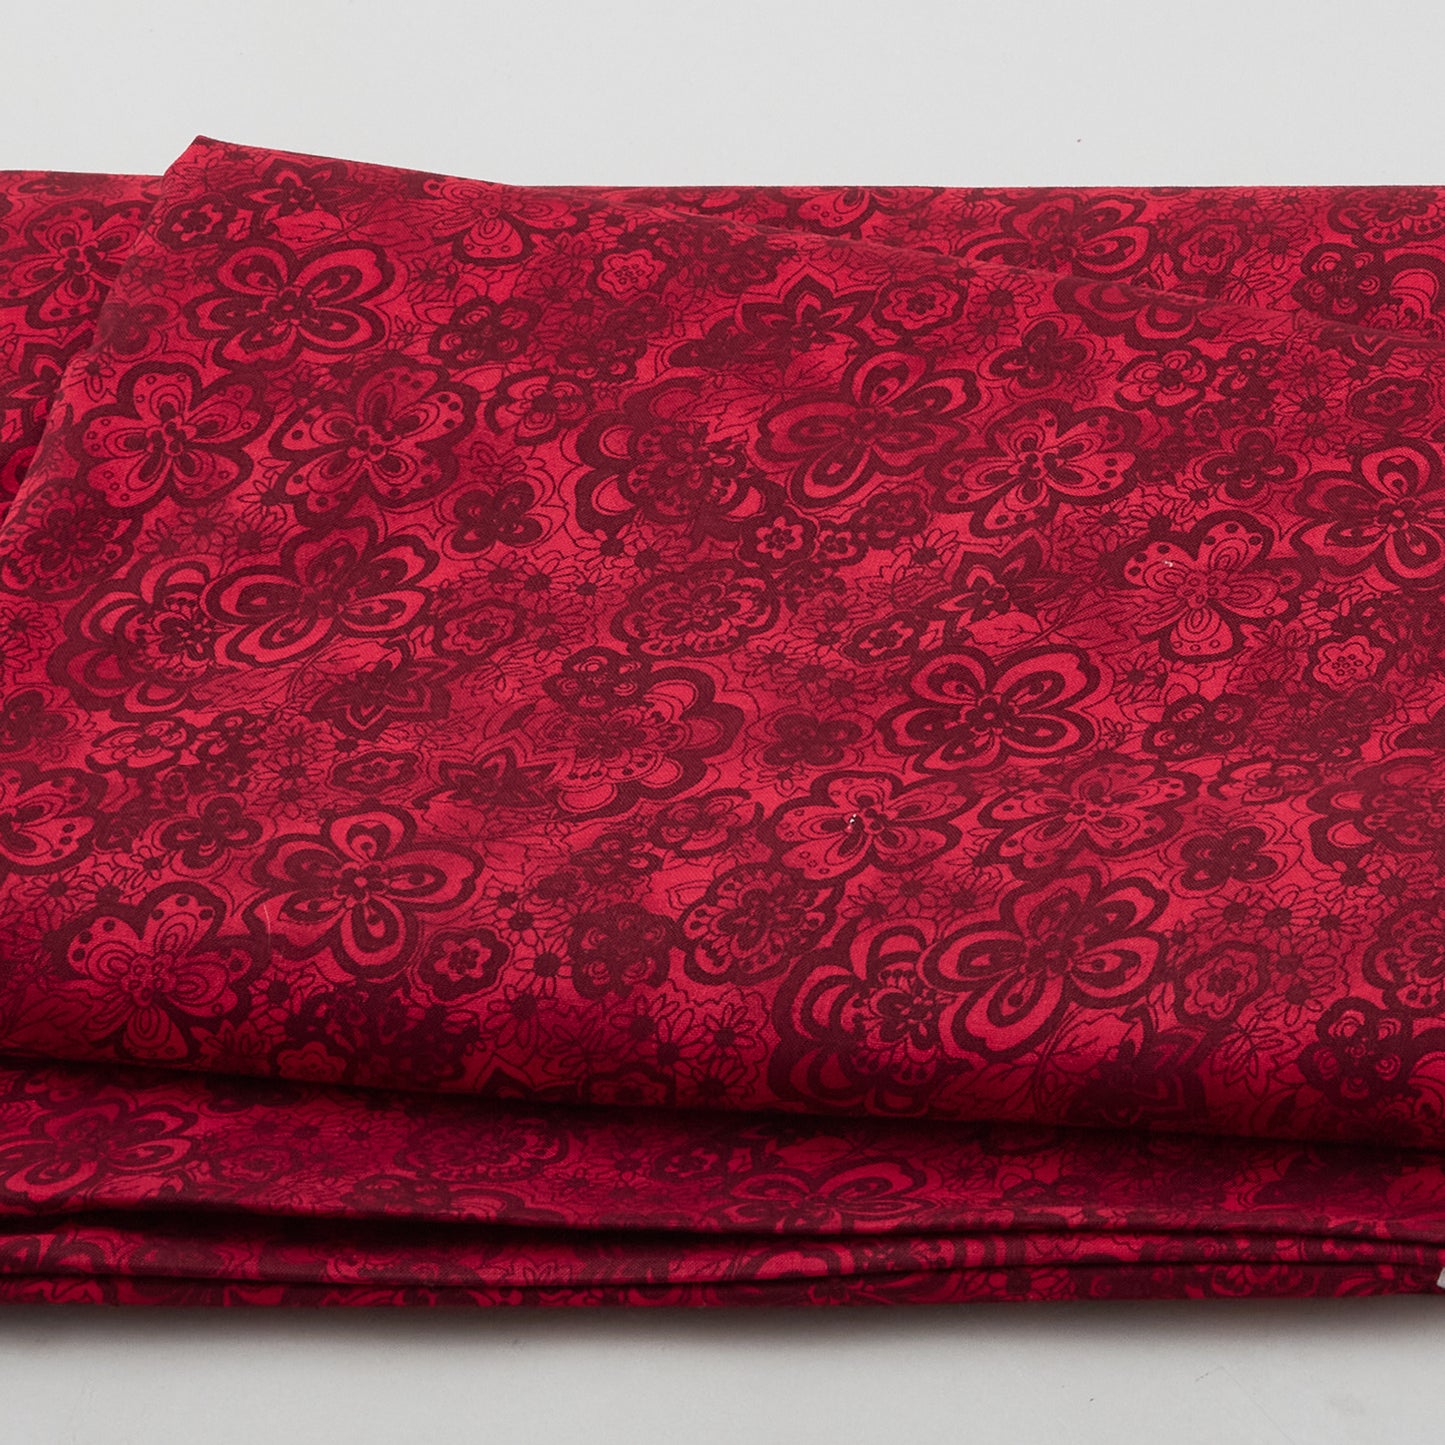 Isadora - Tonal Floral Cherry 108" Wide 3 Yard Cut Primary Image